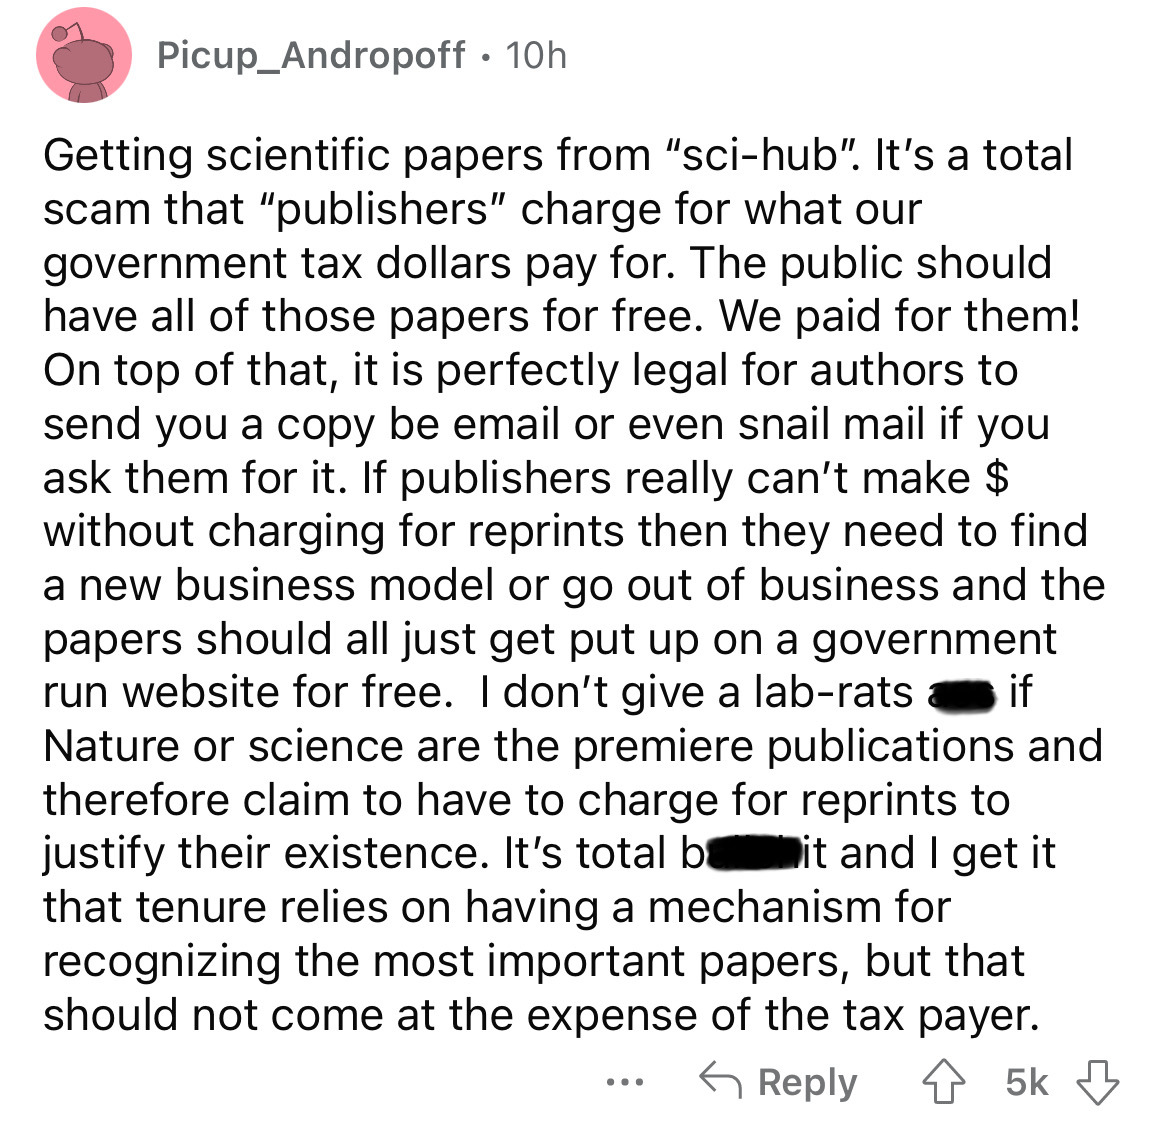 Picup_Andropoff. 10h Getting scientific papers from "scihub". It's a total scam that "publishers" charge for what our government tax dollars pay for. The public should have all of those papers for free. We paid for them! On top of that, it is perfectly…